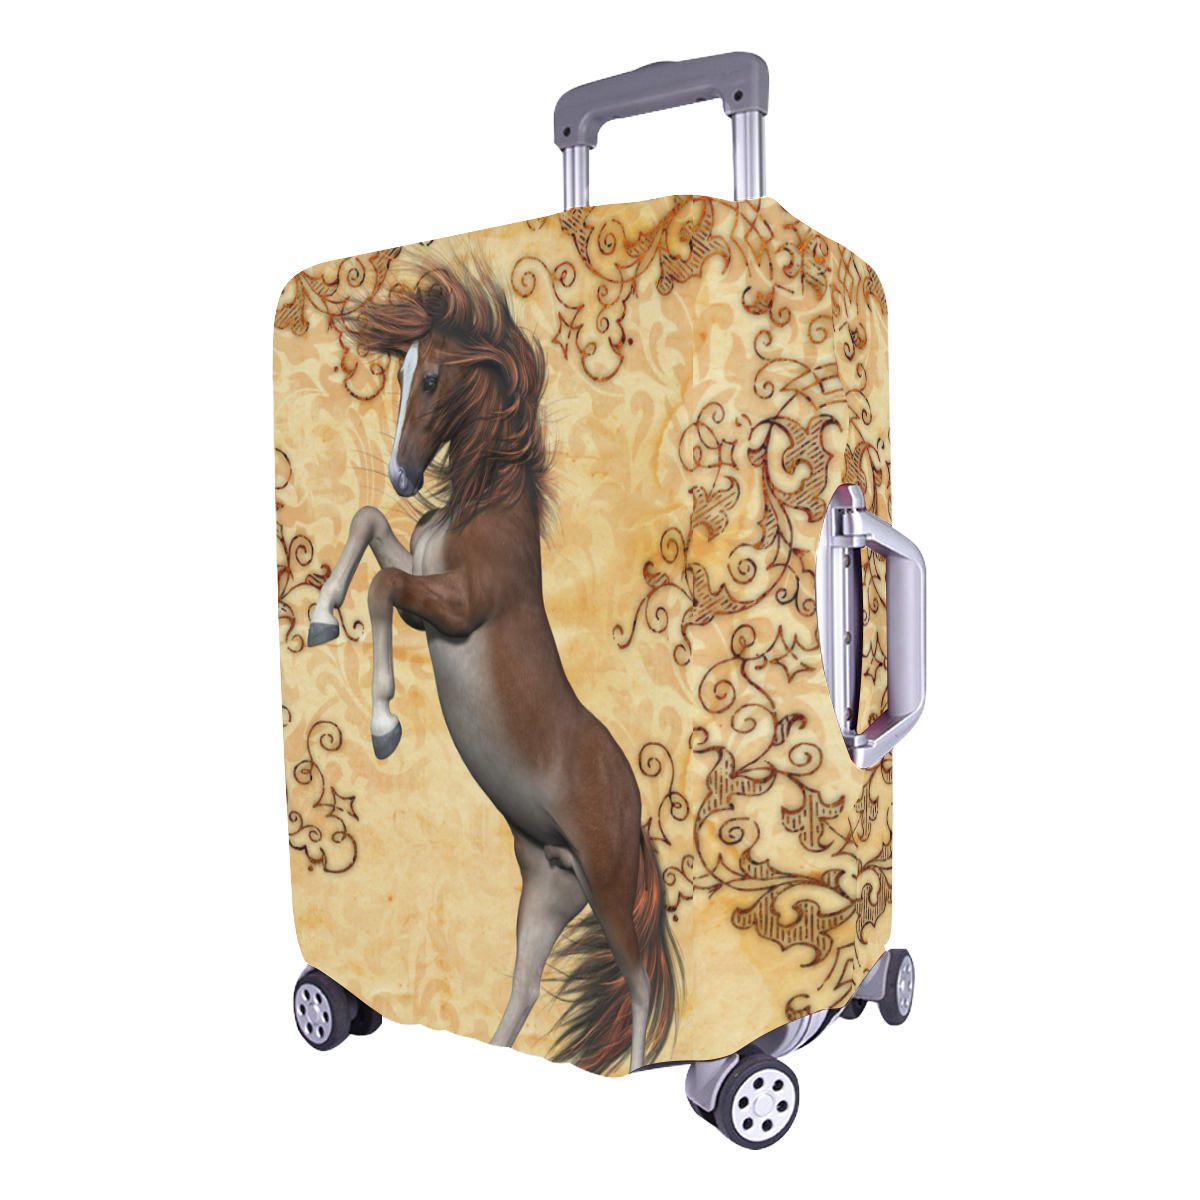 Wonderful brown horse Luggage Cover/Large 26"-28"